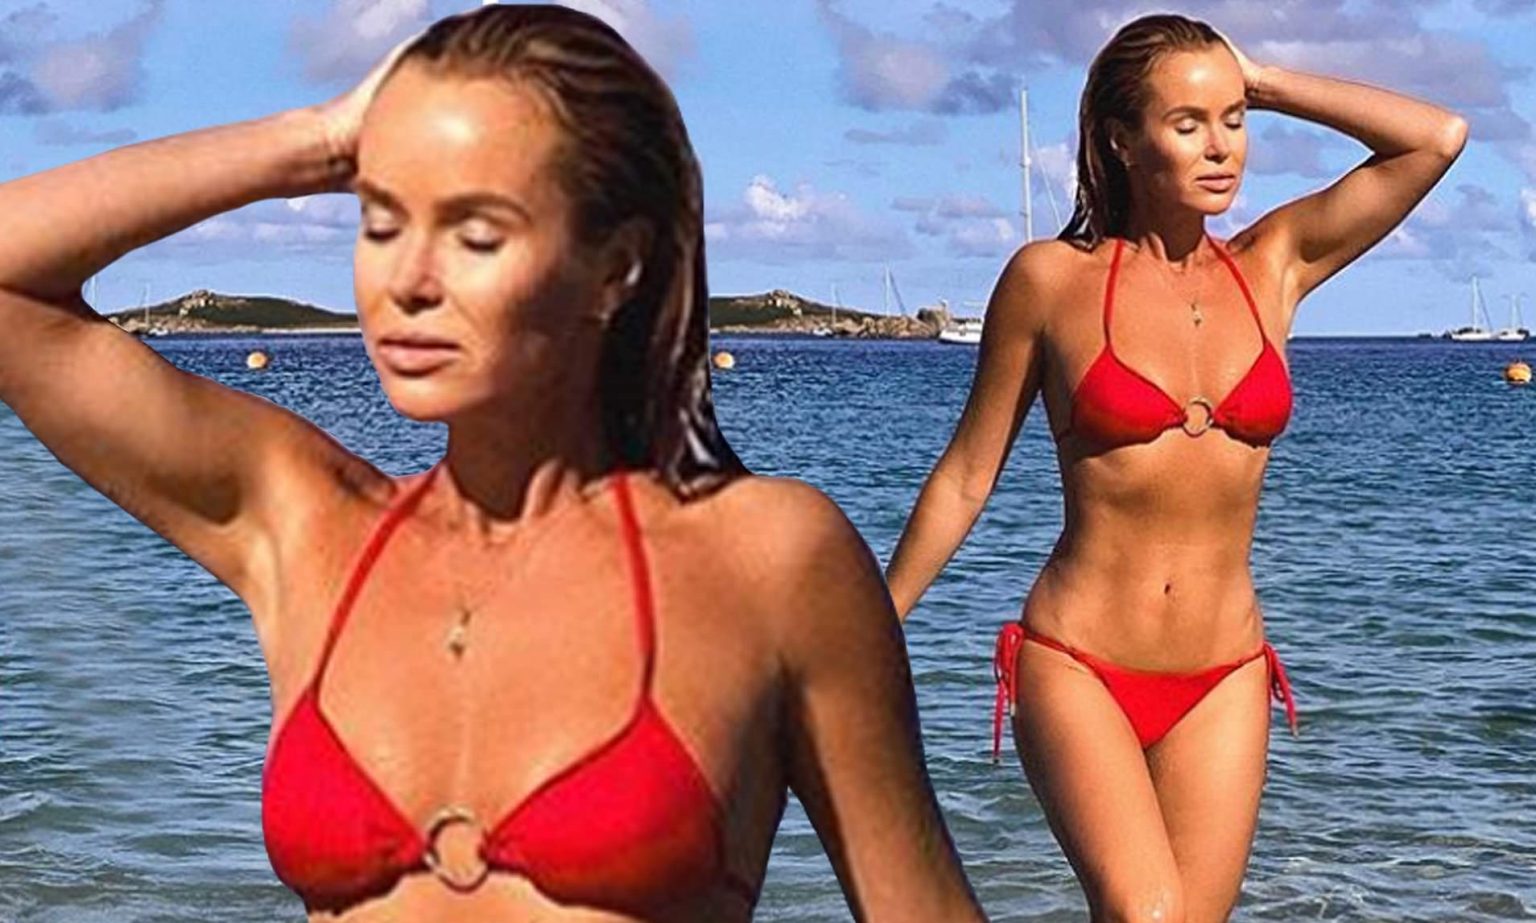 Amanda Holden S British Staycation Photos Brought Out The Internet S Horniest Commenters Again